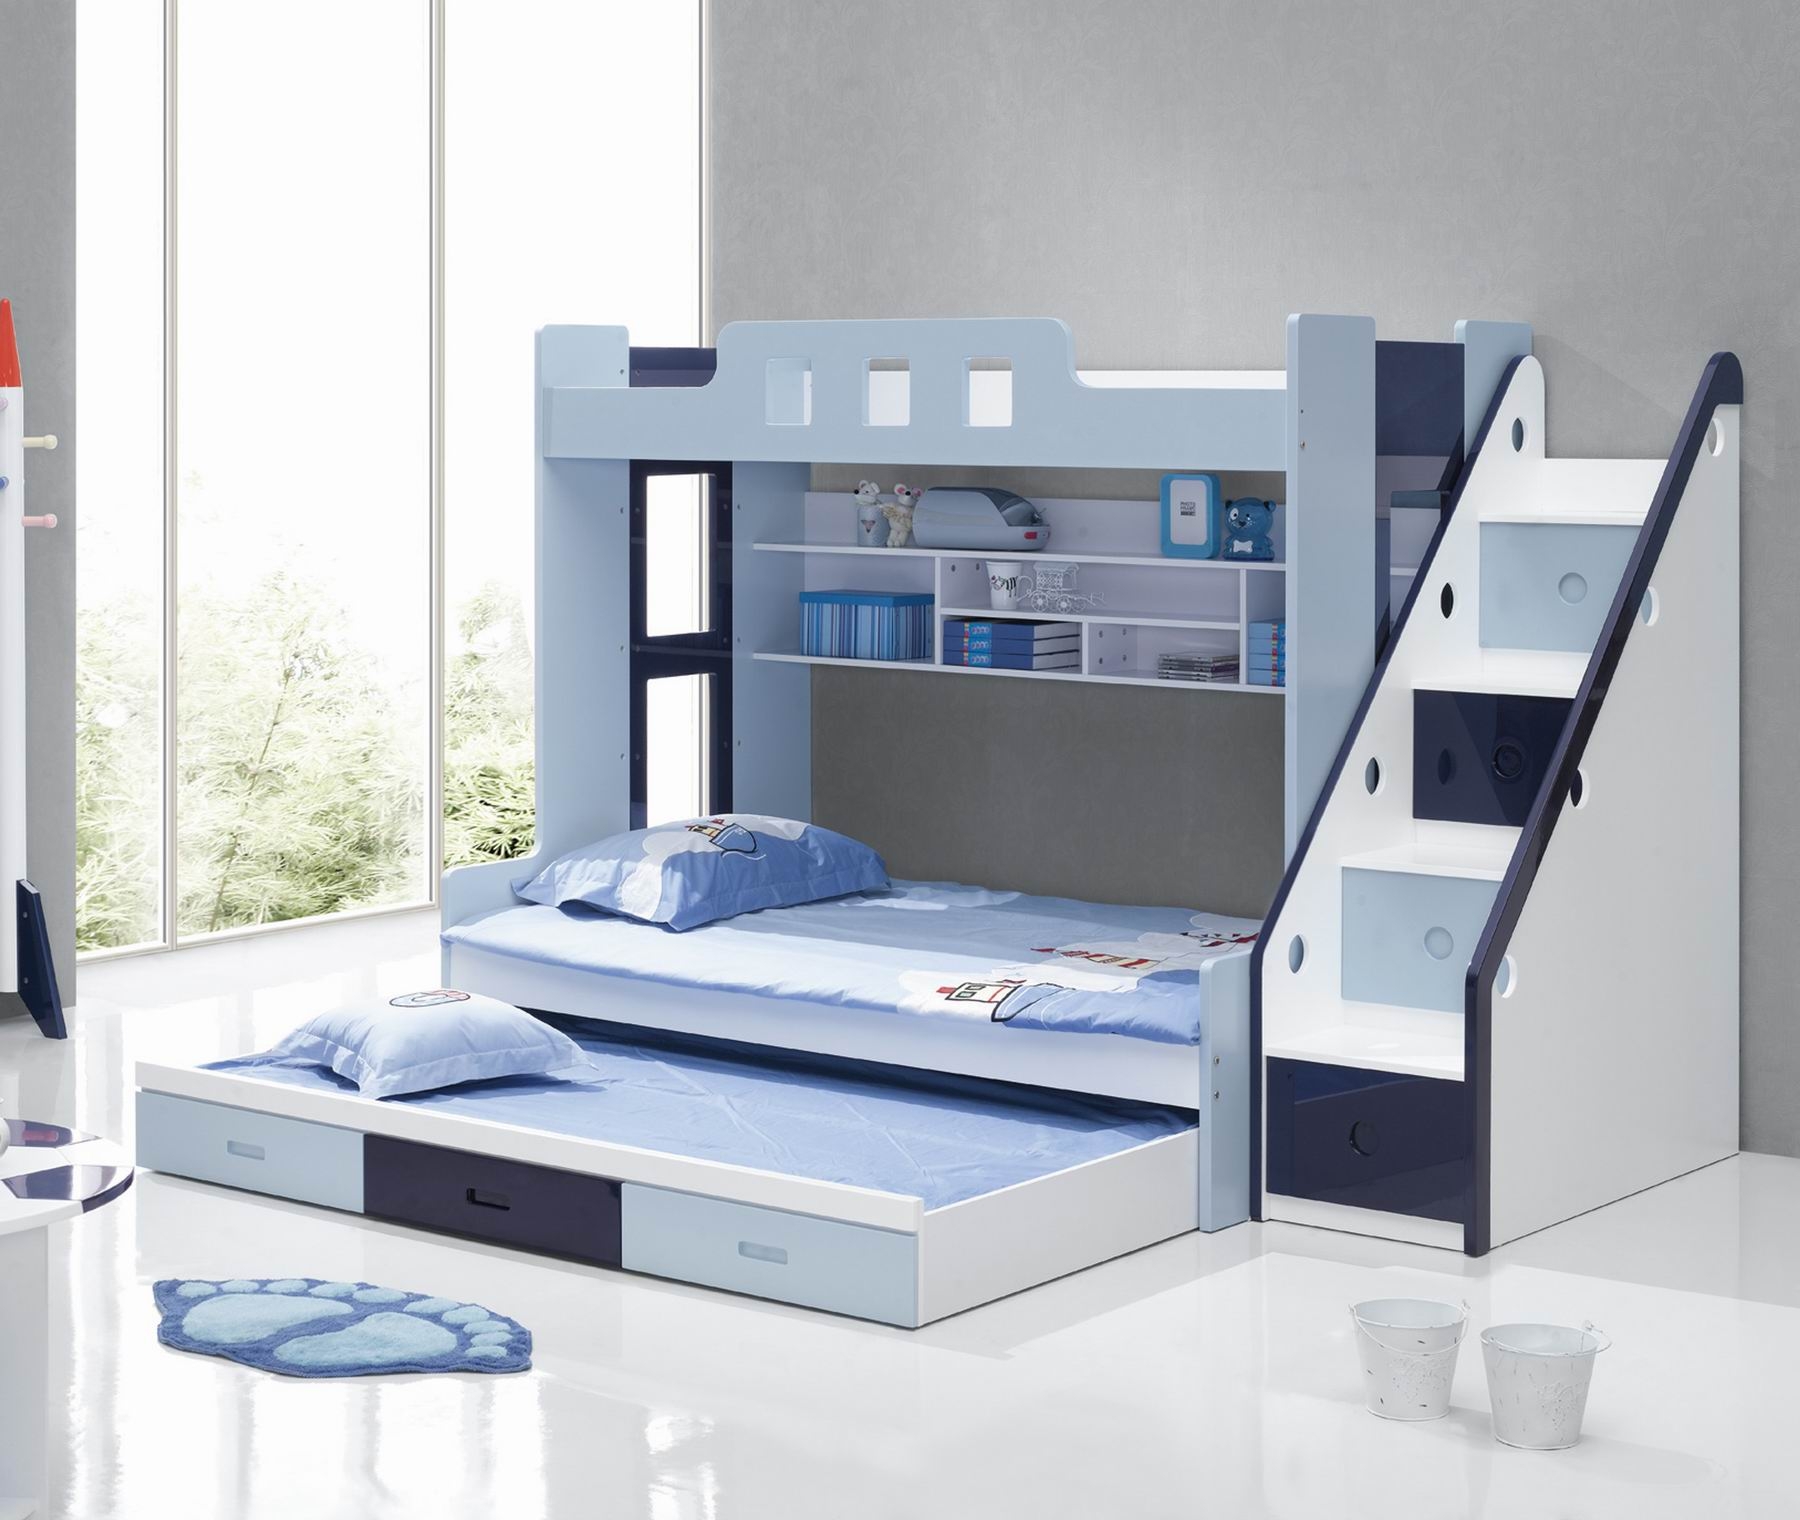 Choosing the right bunk beds with stairs for your children